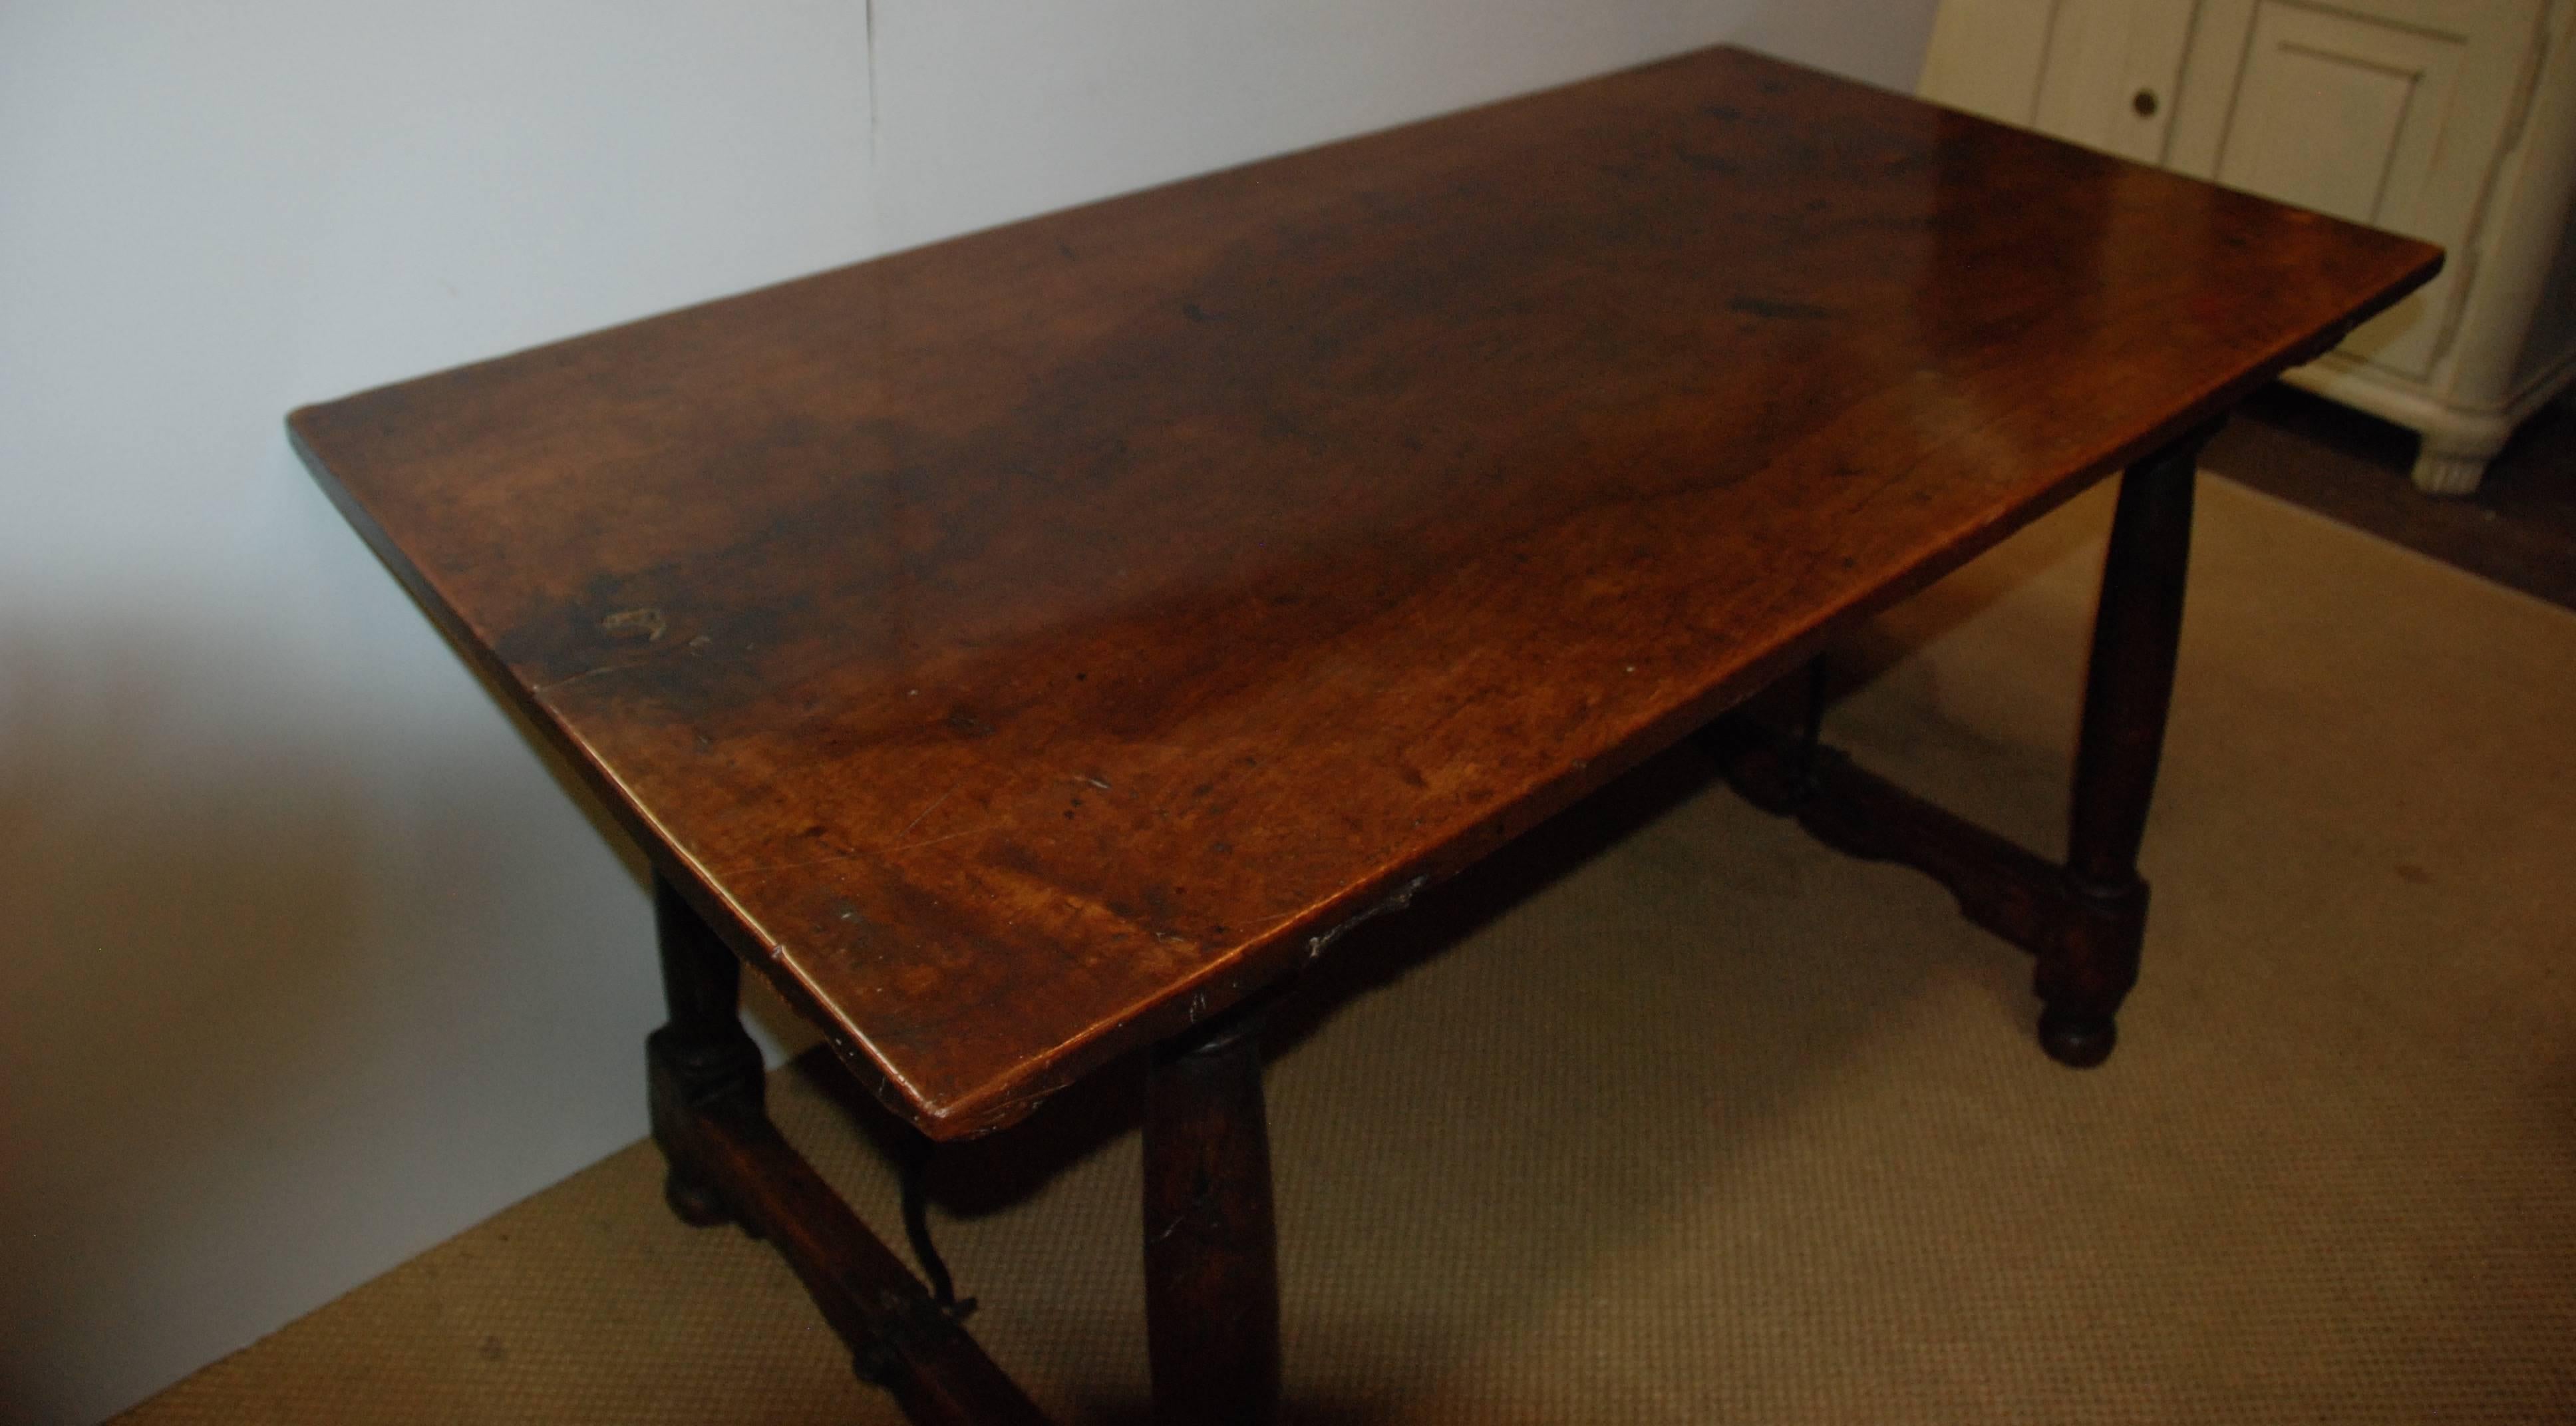 17th Century Portuguese walnut table iron base. Beautiful aged walnut top that is one piece of solid wood. All original.